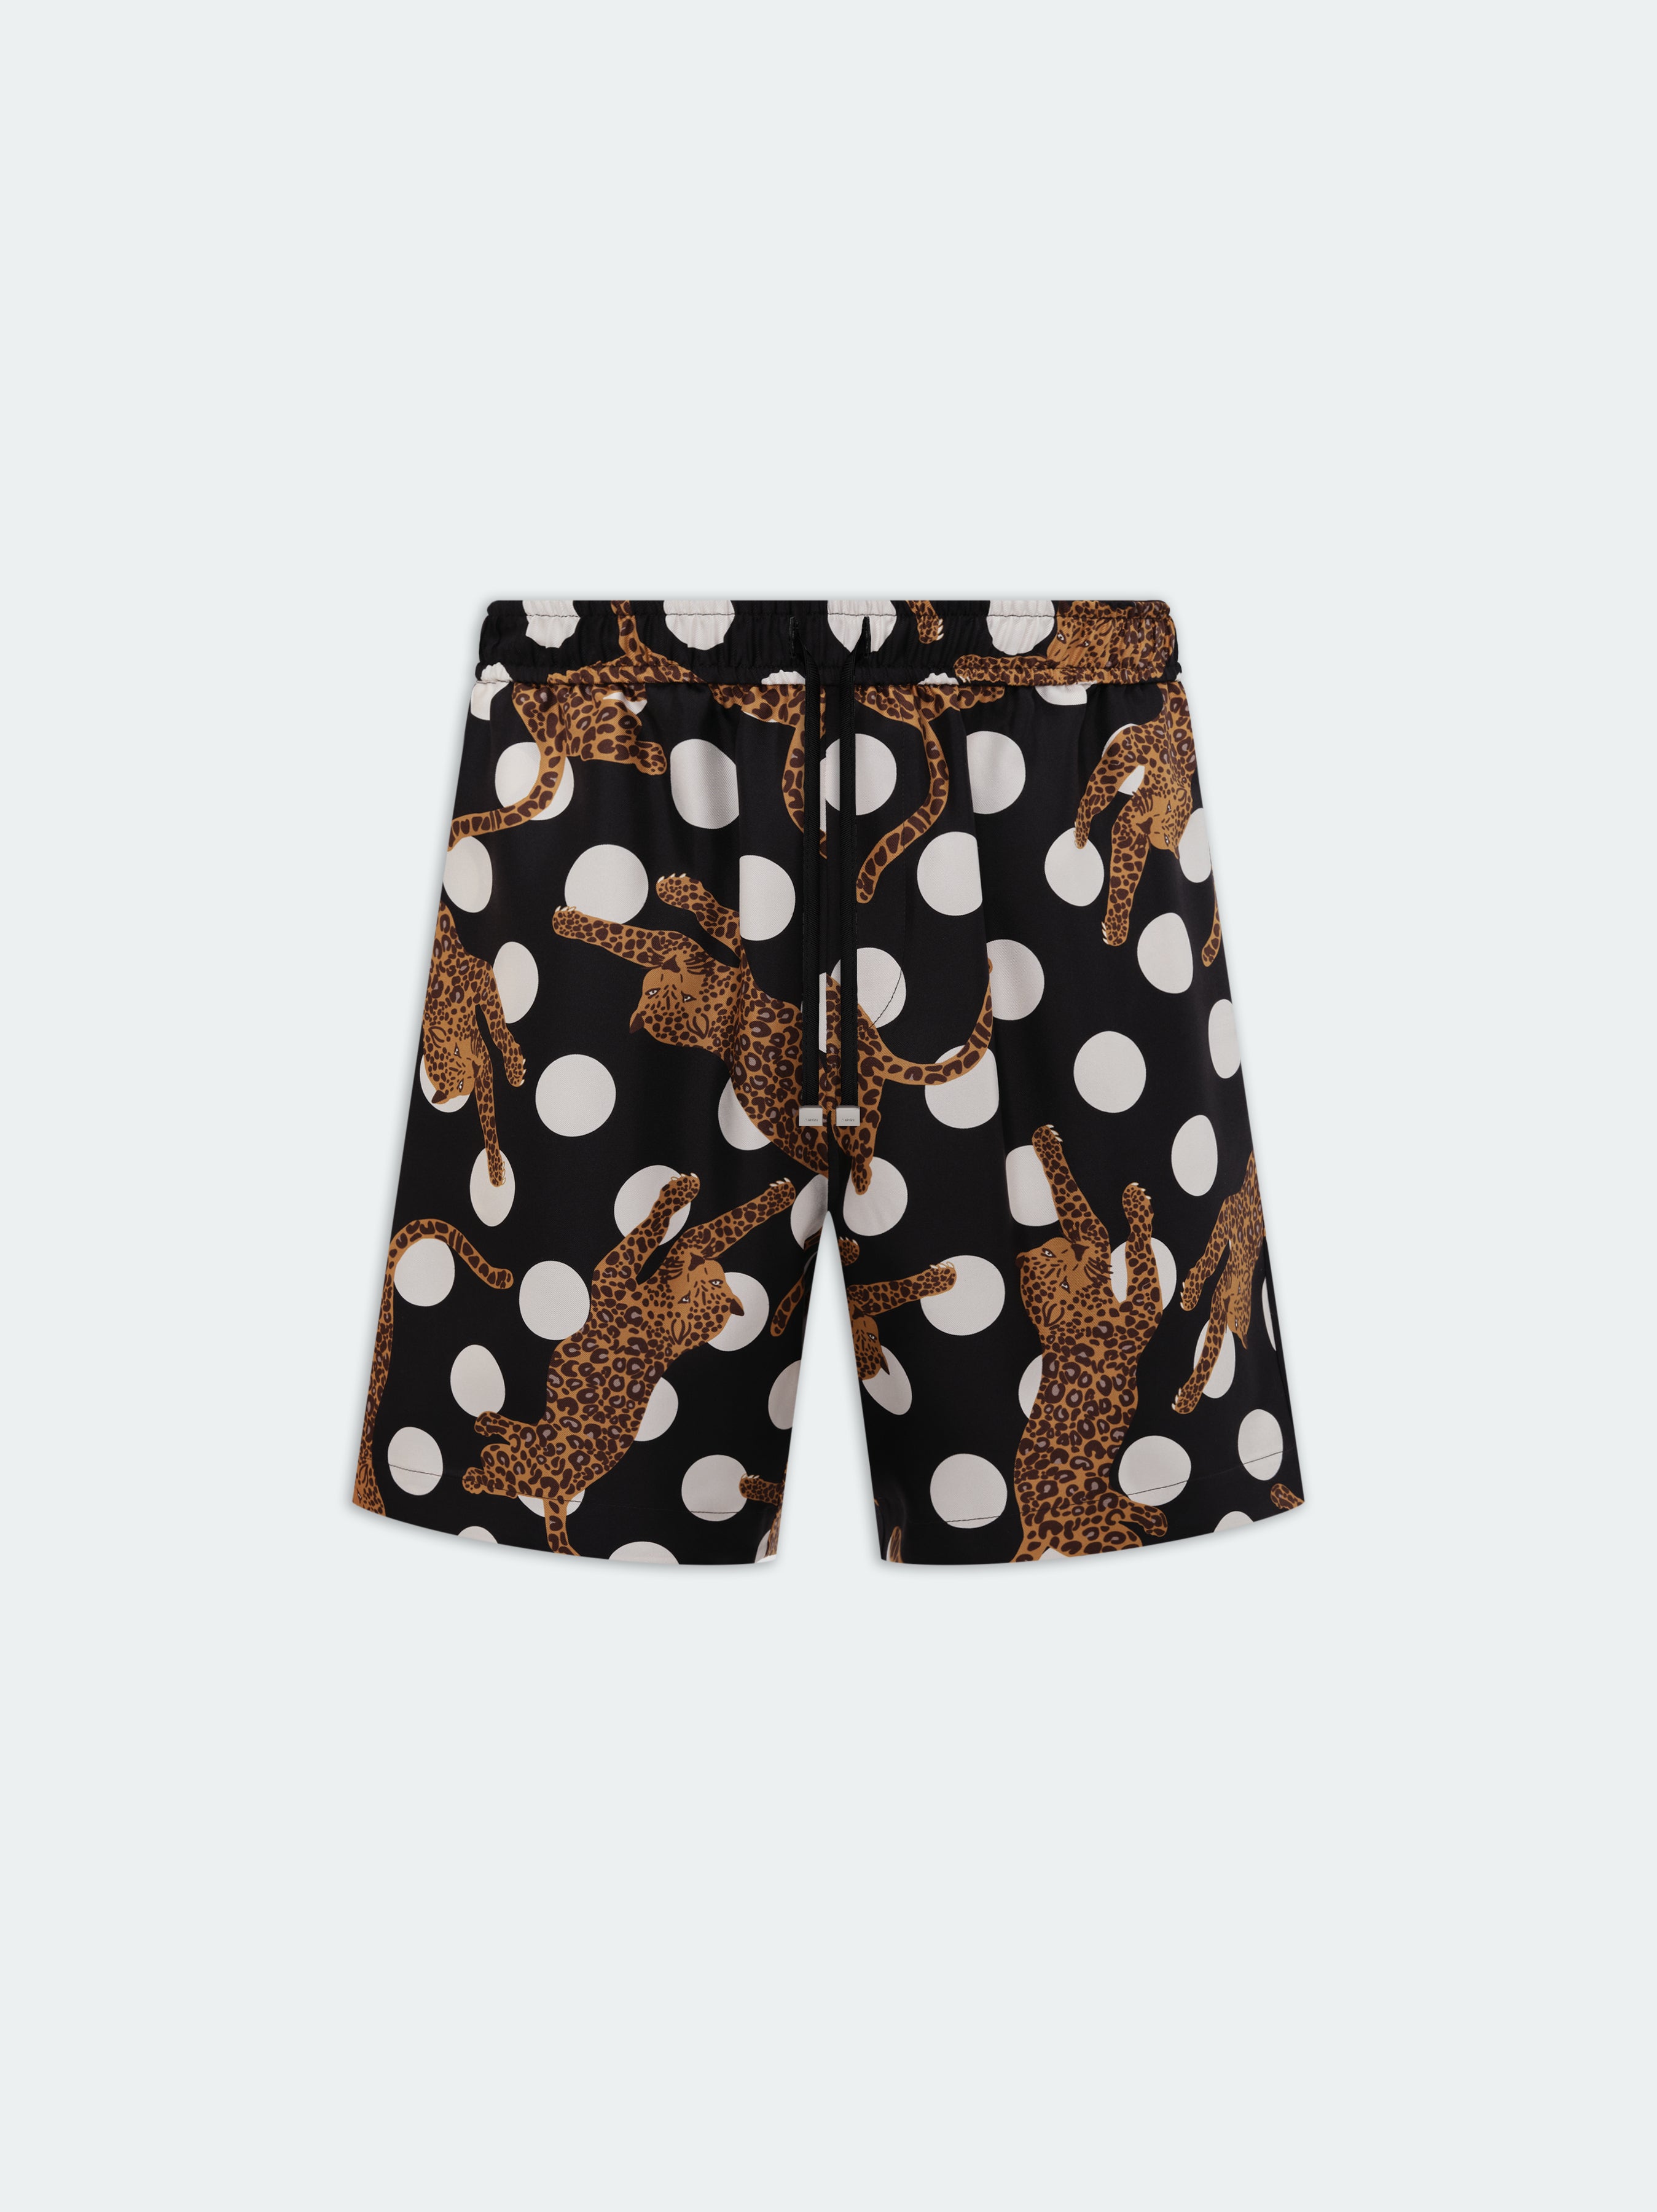 Product LEOPARD POLKA DOTS SILK SHORT - Black featured image